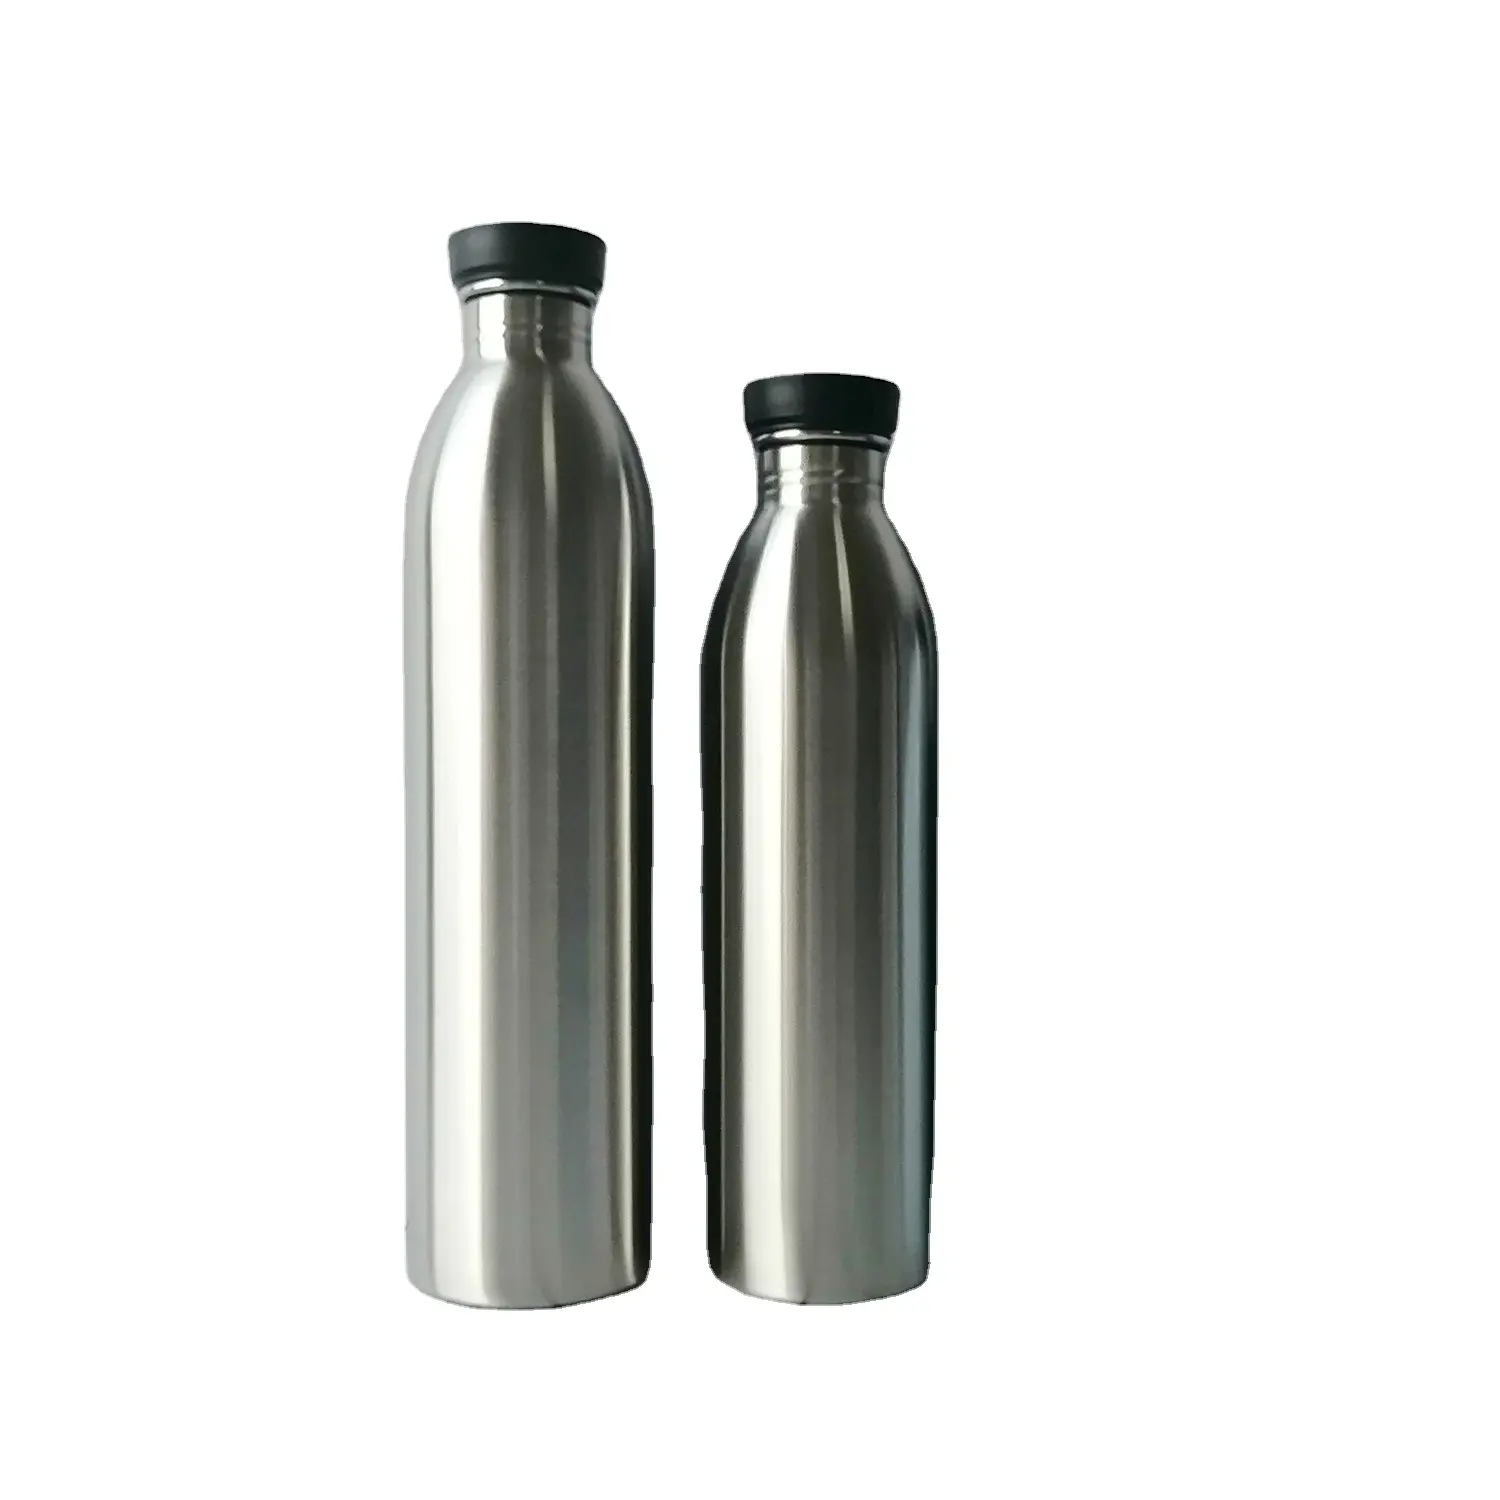 Europe standard 0.35L 0.5L 0.75L double wall stainless steel vacuum flask insulated water bottle by Sweden DWELLS AB